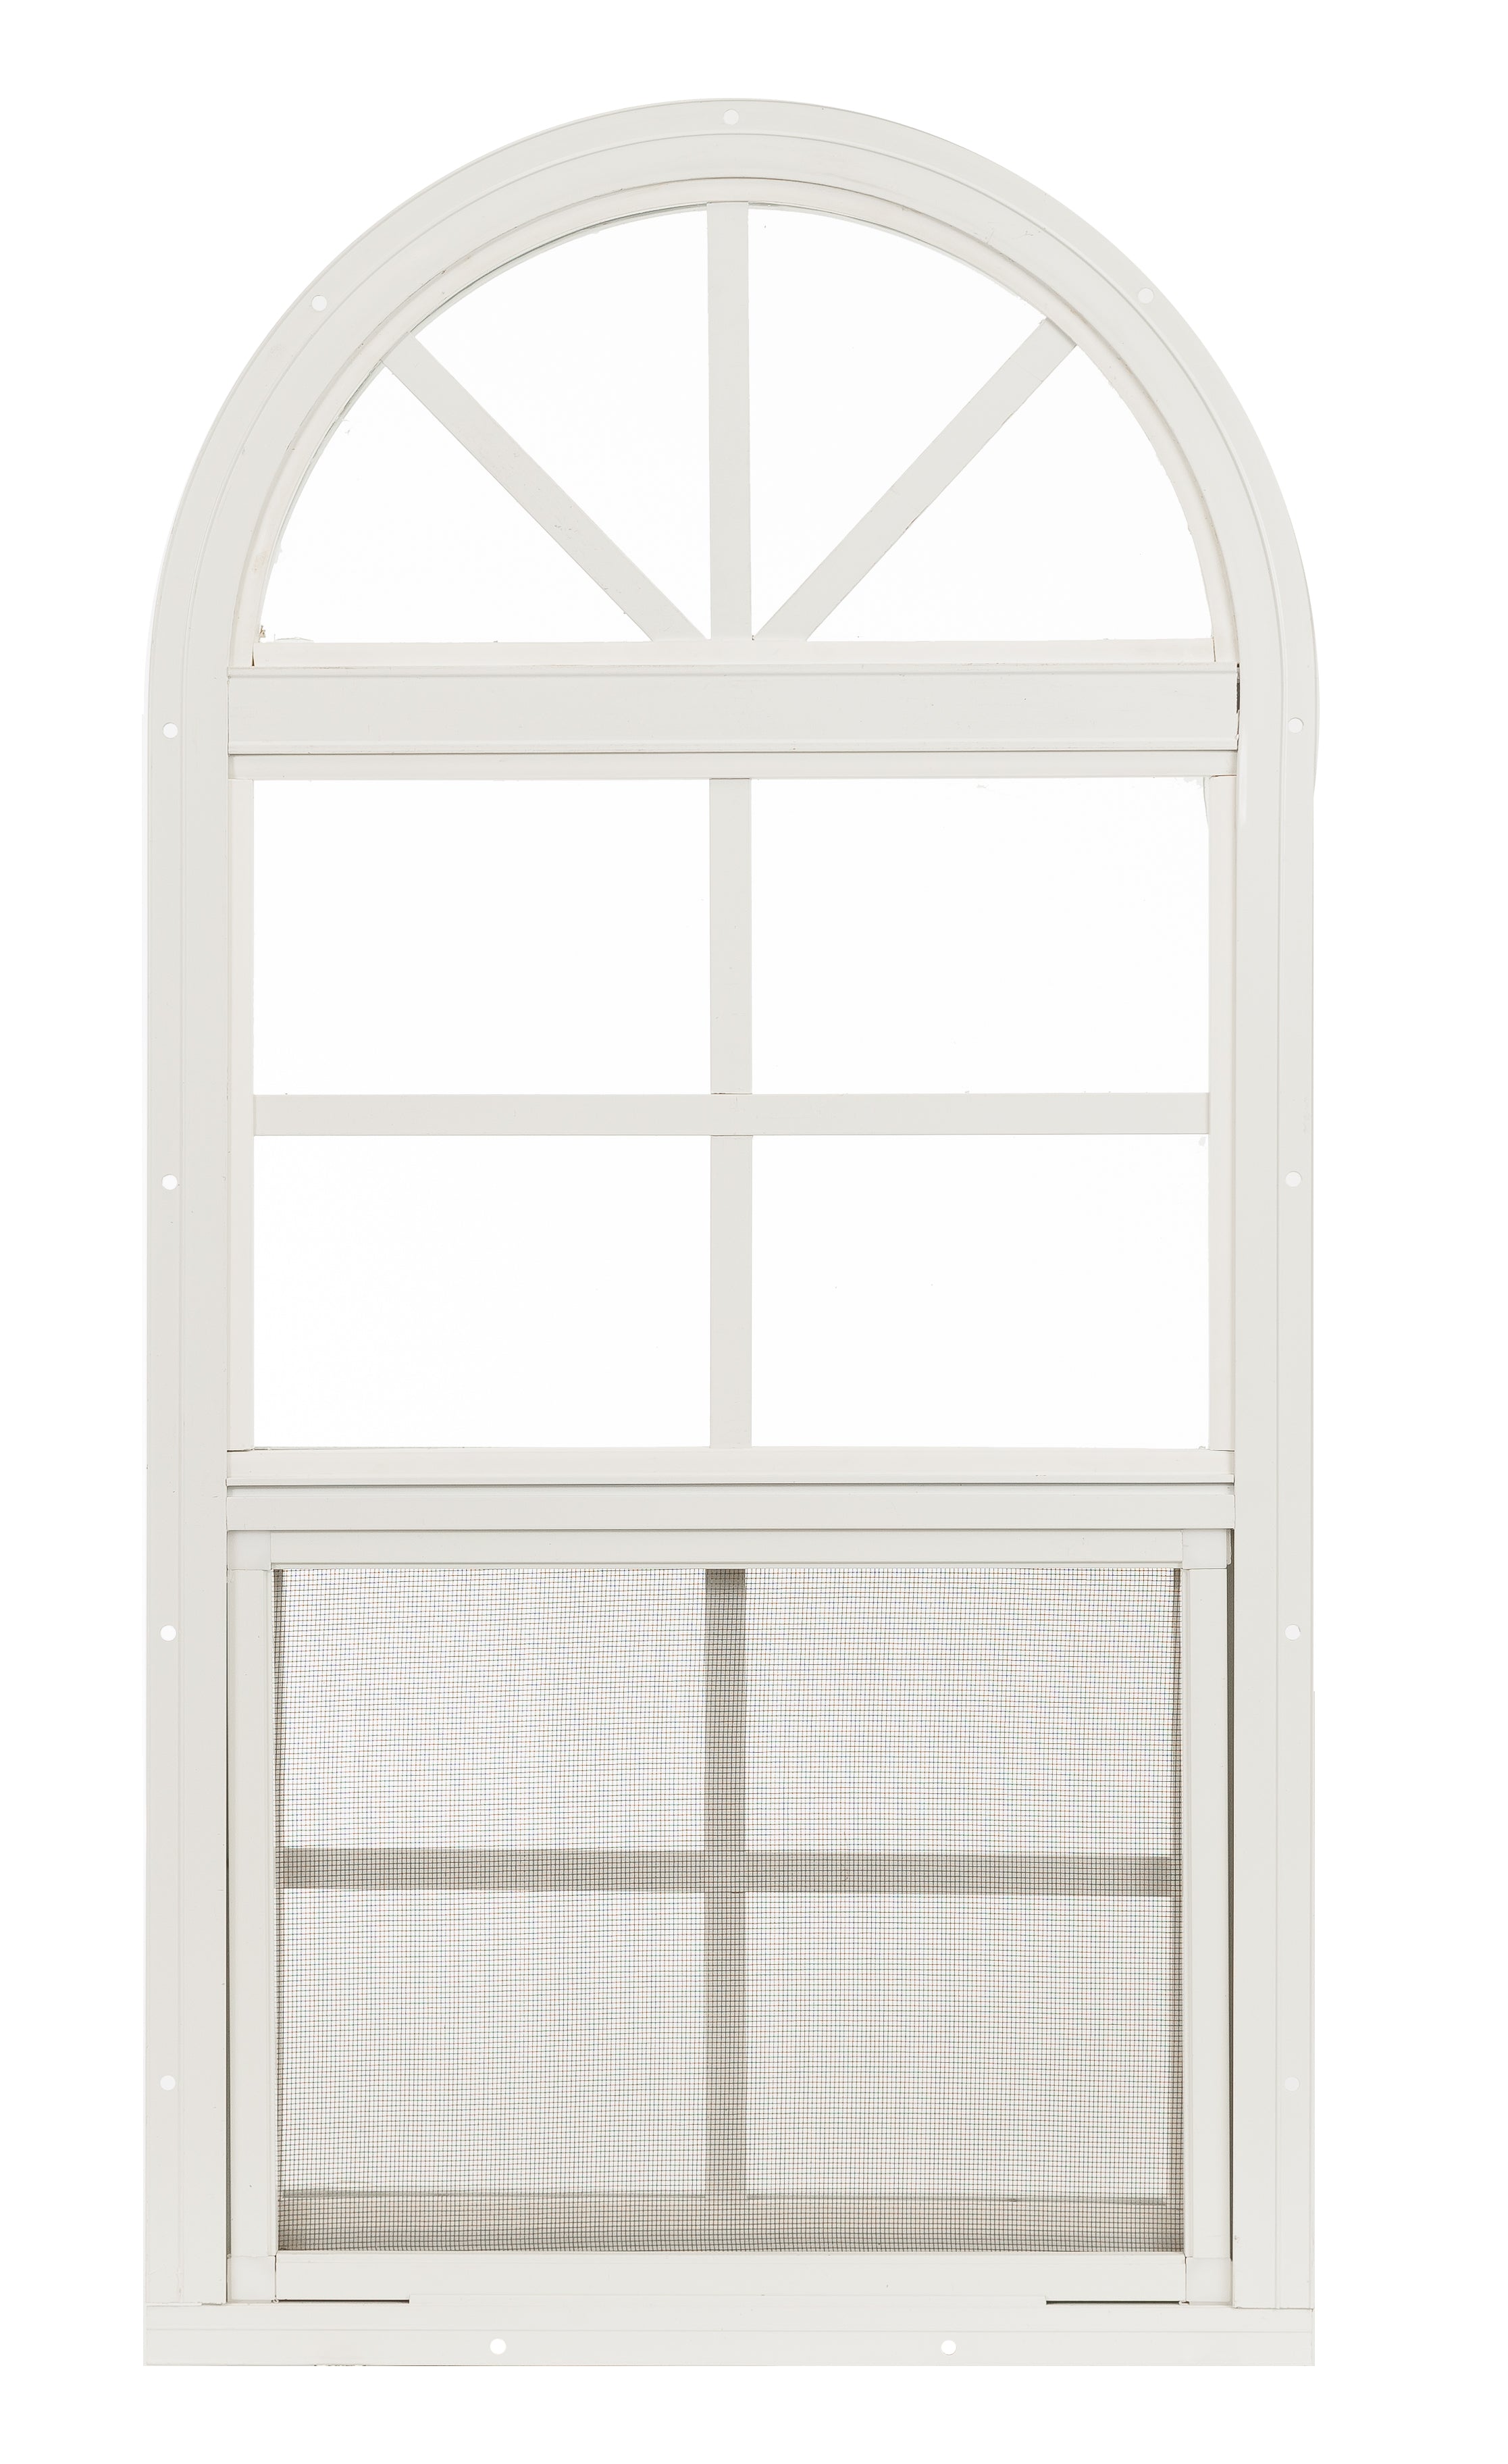 14" W x 28" H Arch Top White Window for Sheds, Playhouses, and MORE 